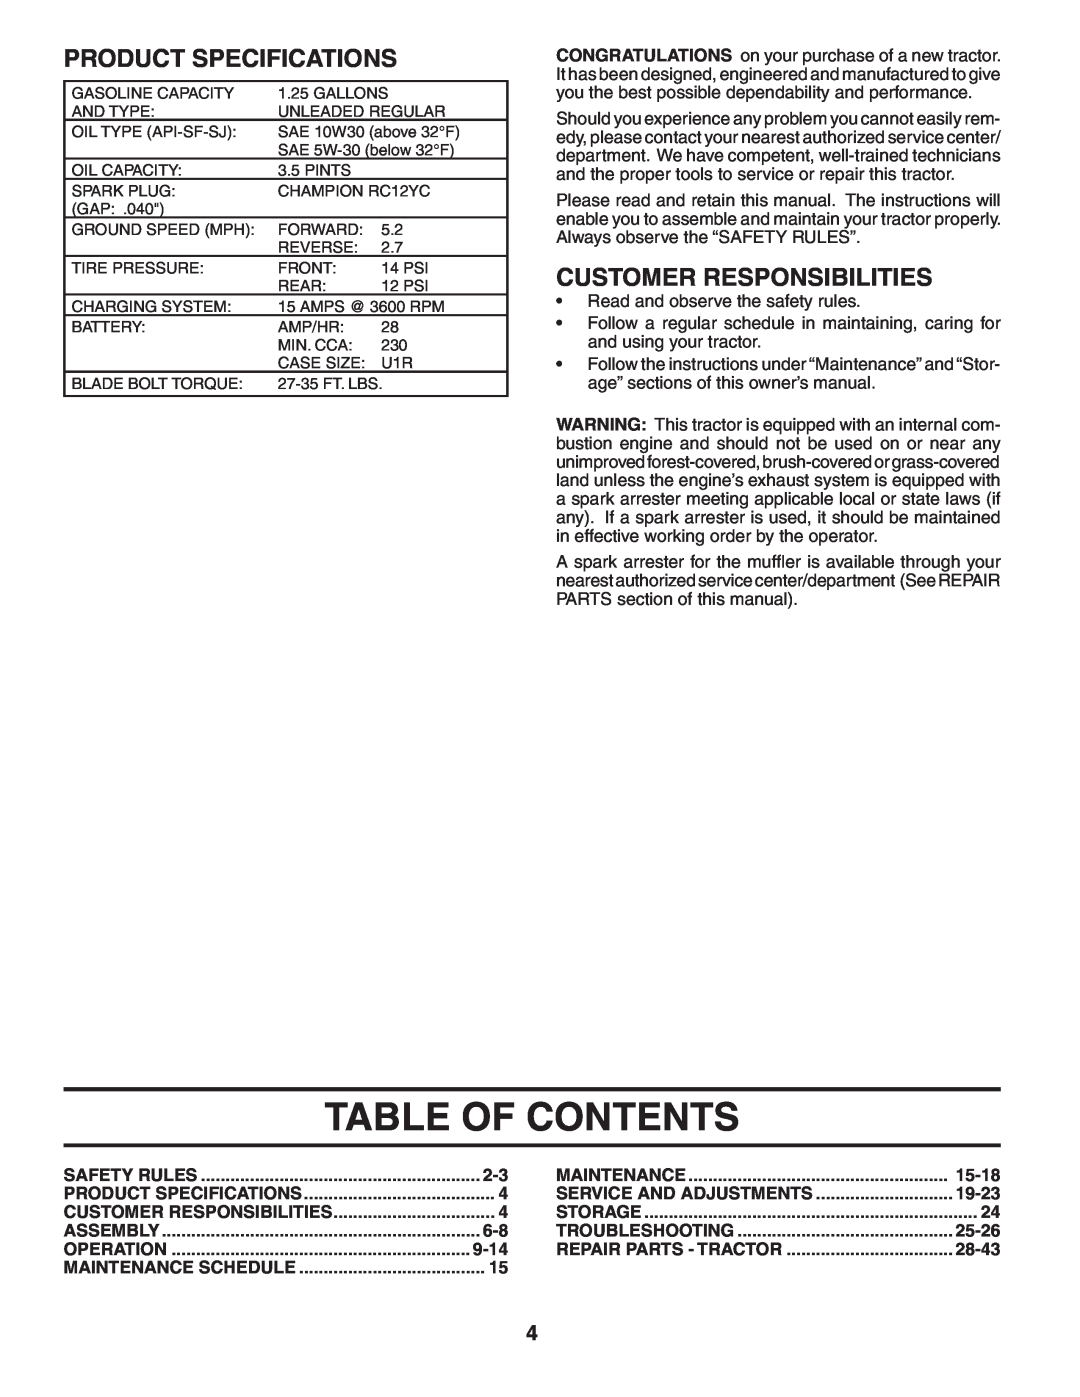 Husqvarna LTH1742 owner manual Table Of Contents, Product Specifications, Customer Responsibilities 